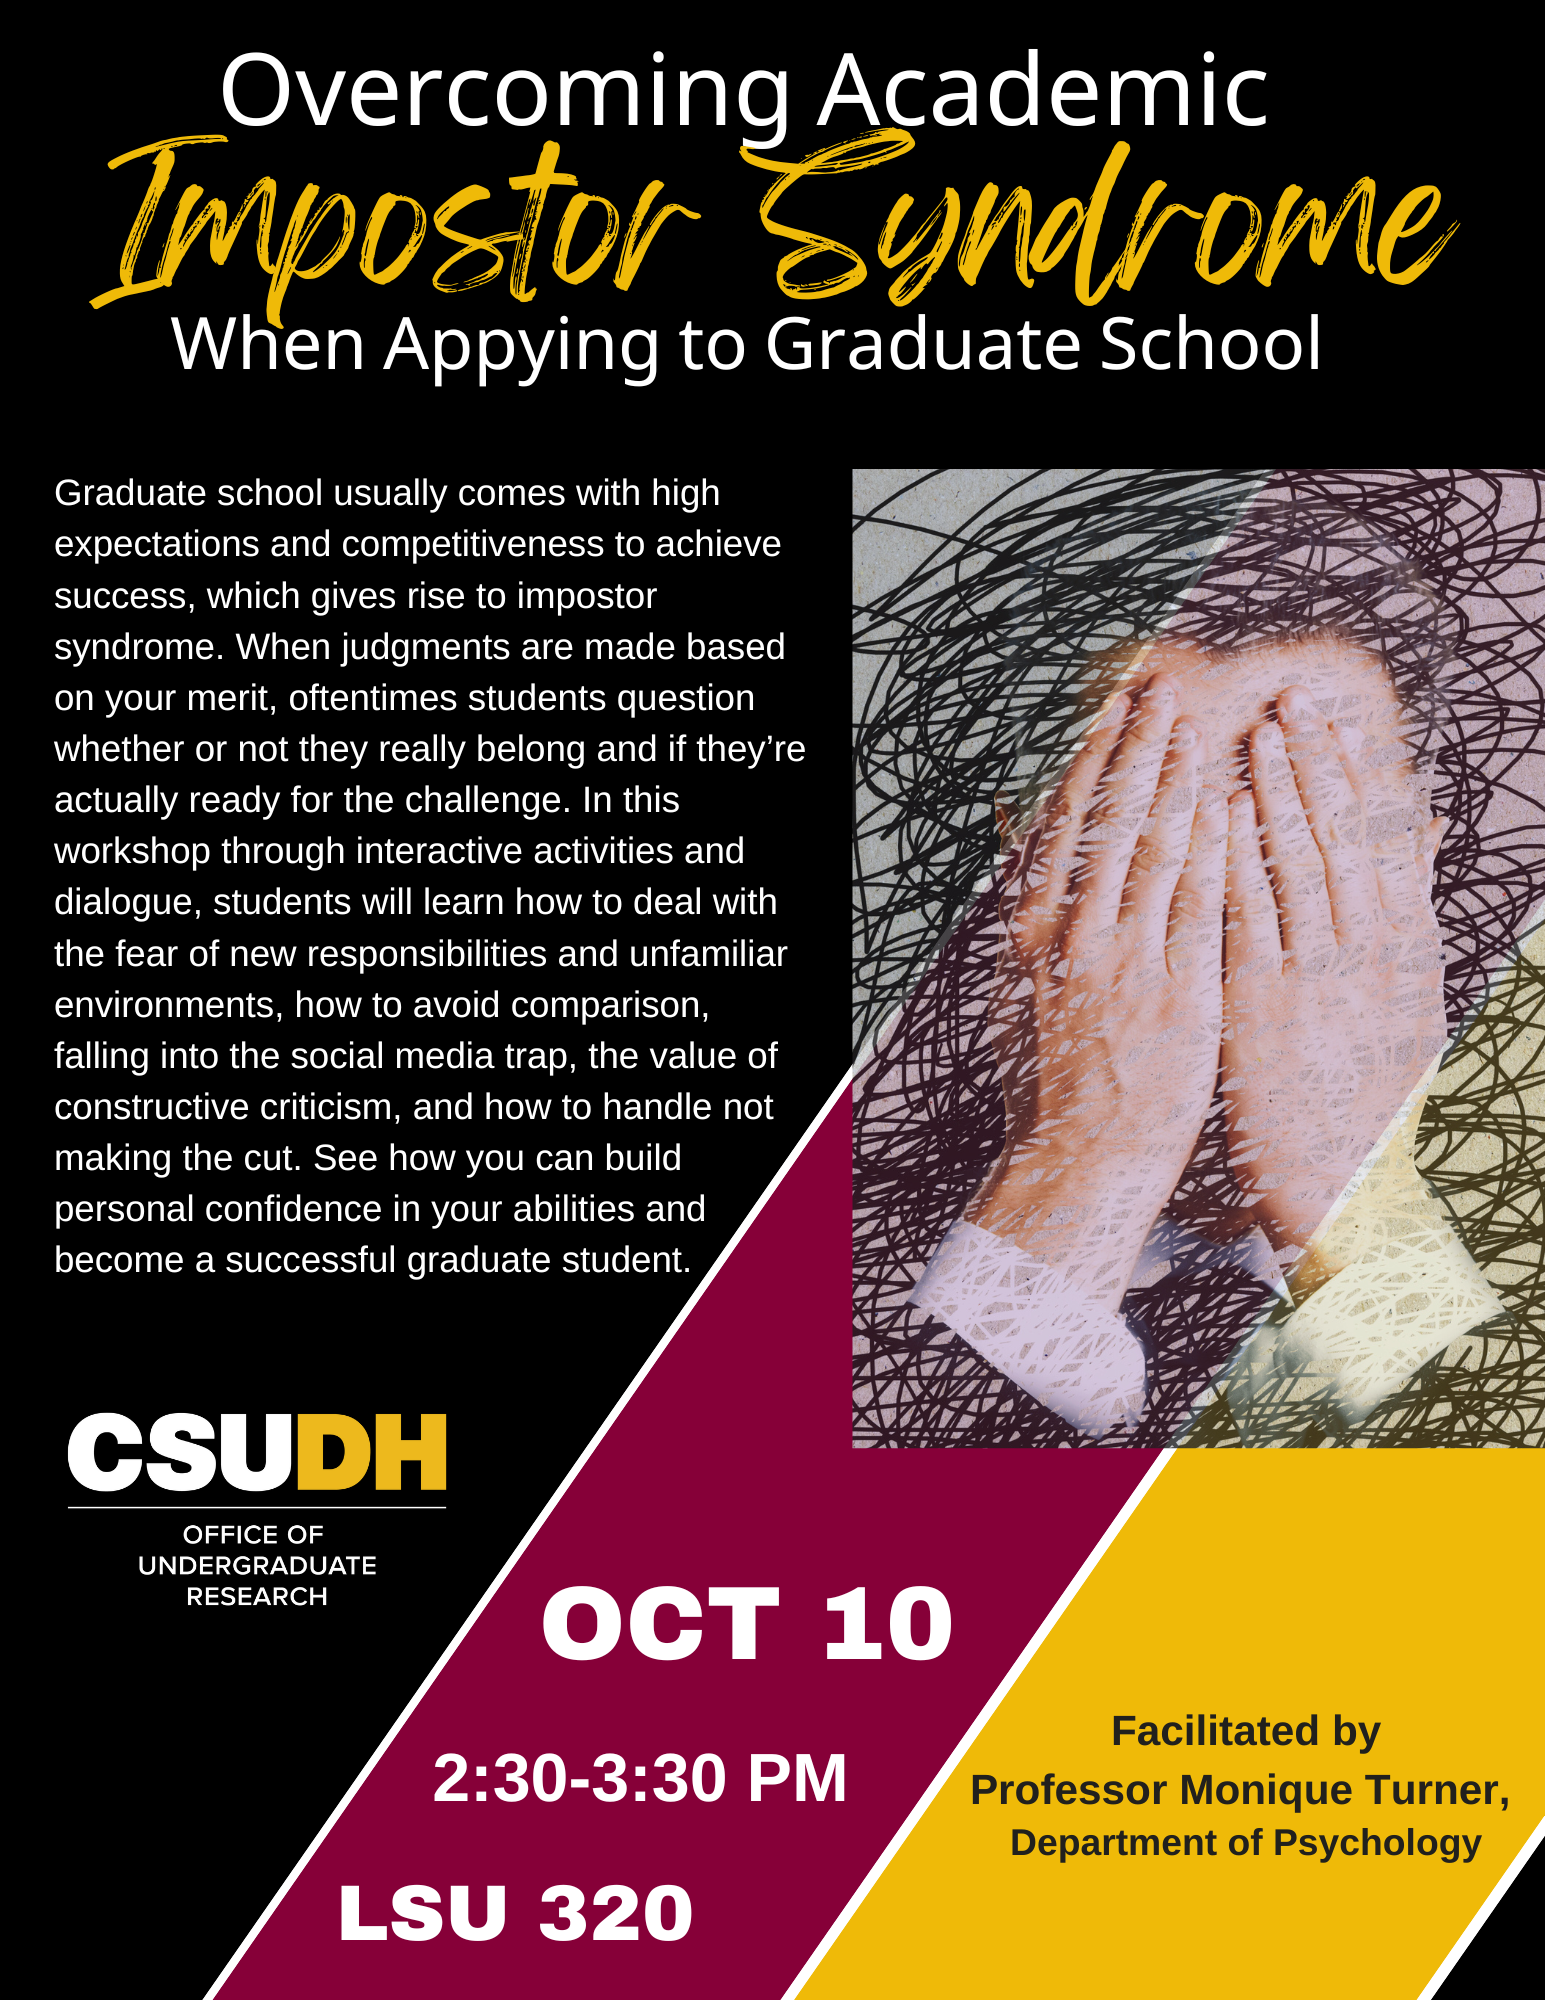 Overcoming-Academic-Impostor-Syndrome-10-10-23